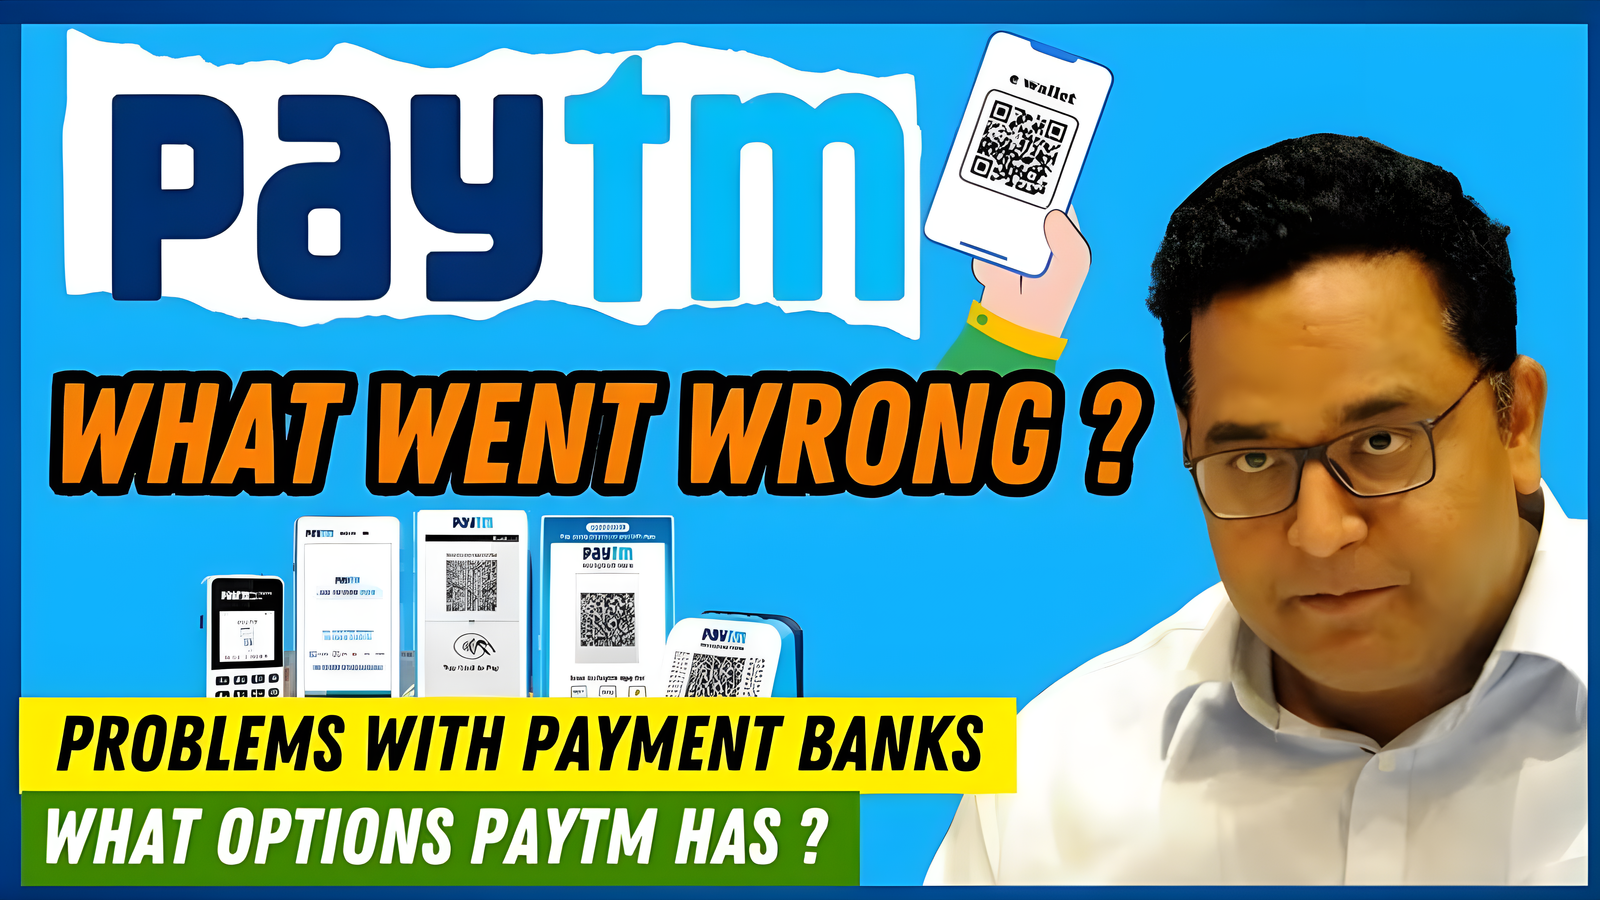 Trending Tech News: Paytm Payments Bank’s Controversies and Challenges